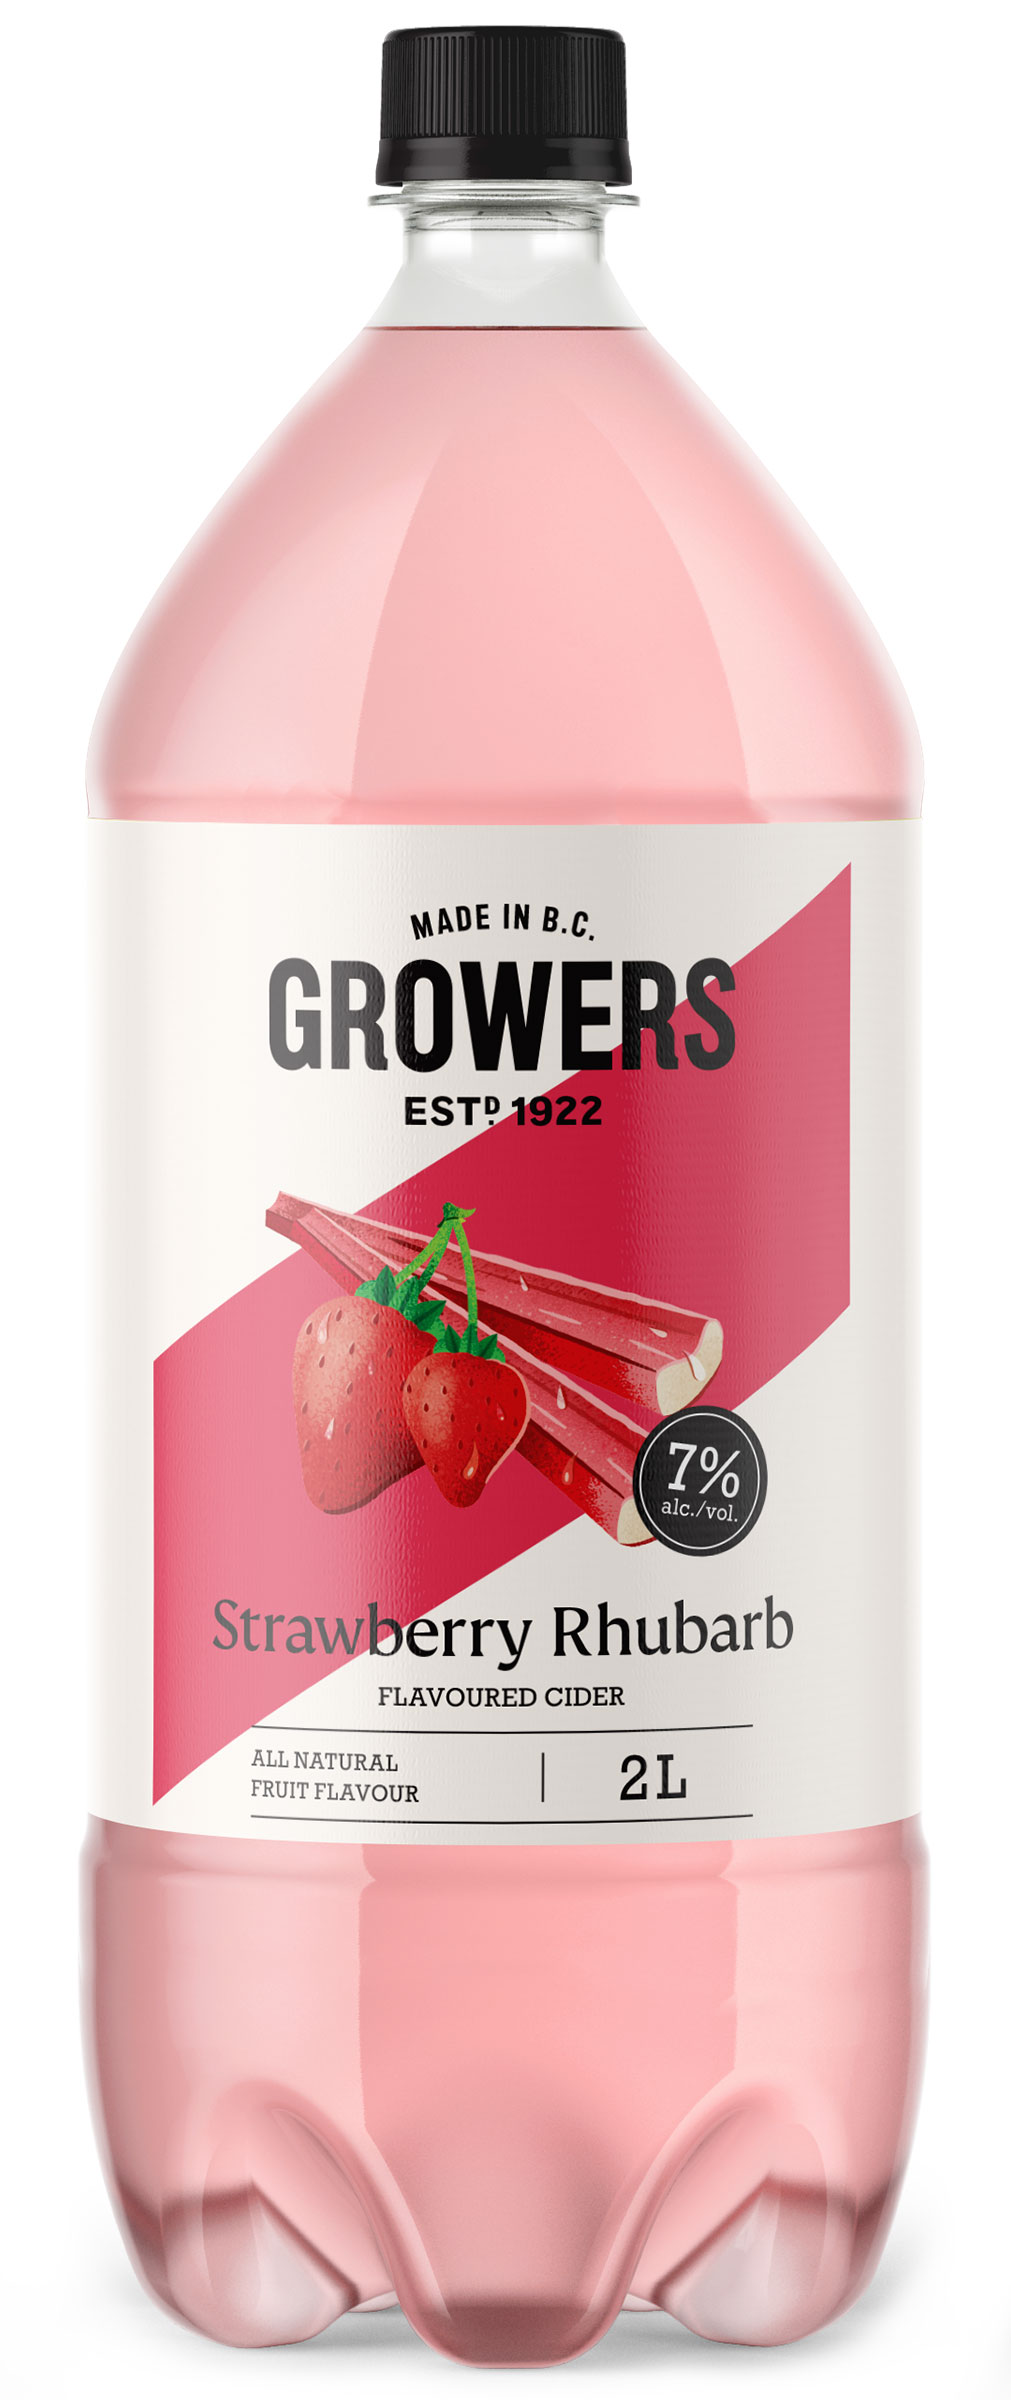 Bottle of Growers Strawberry Rhubarb cider